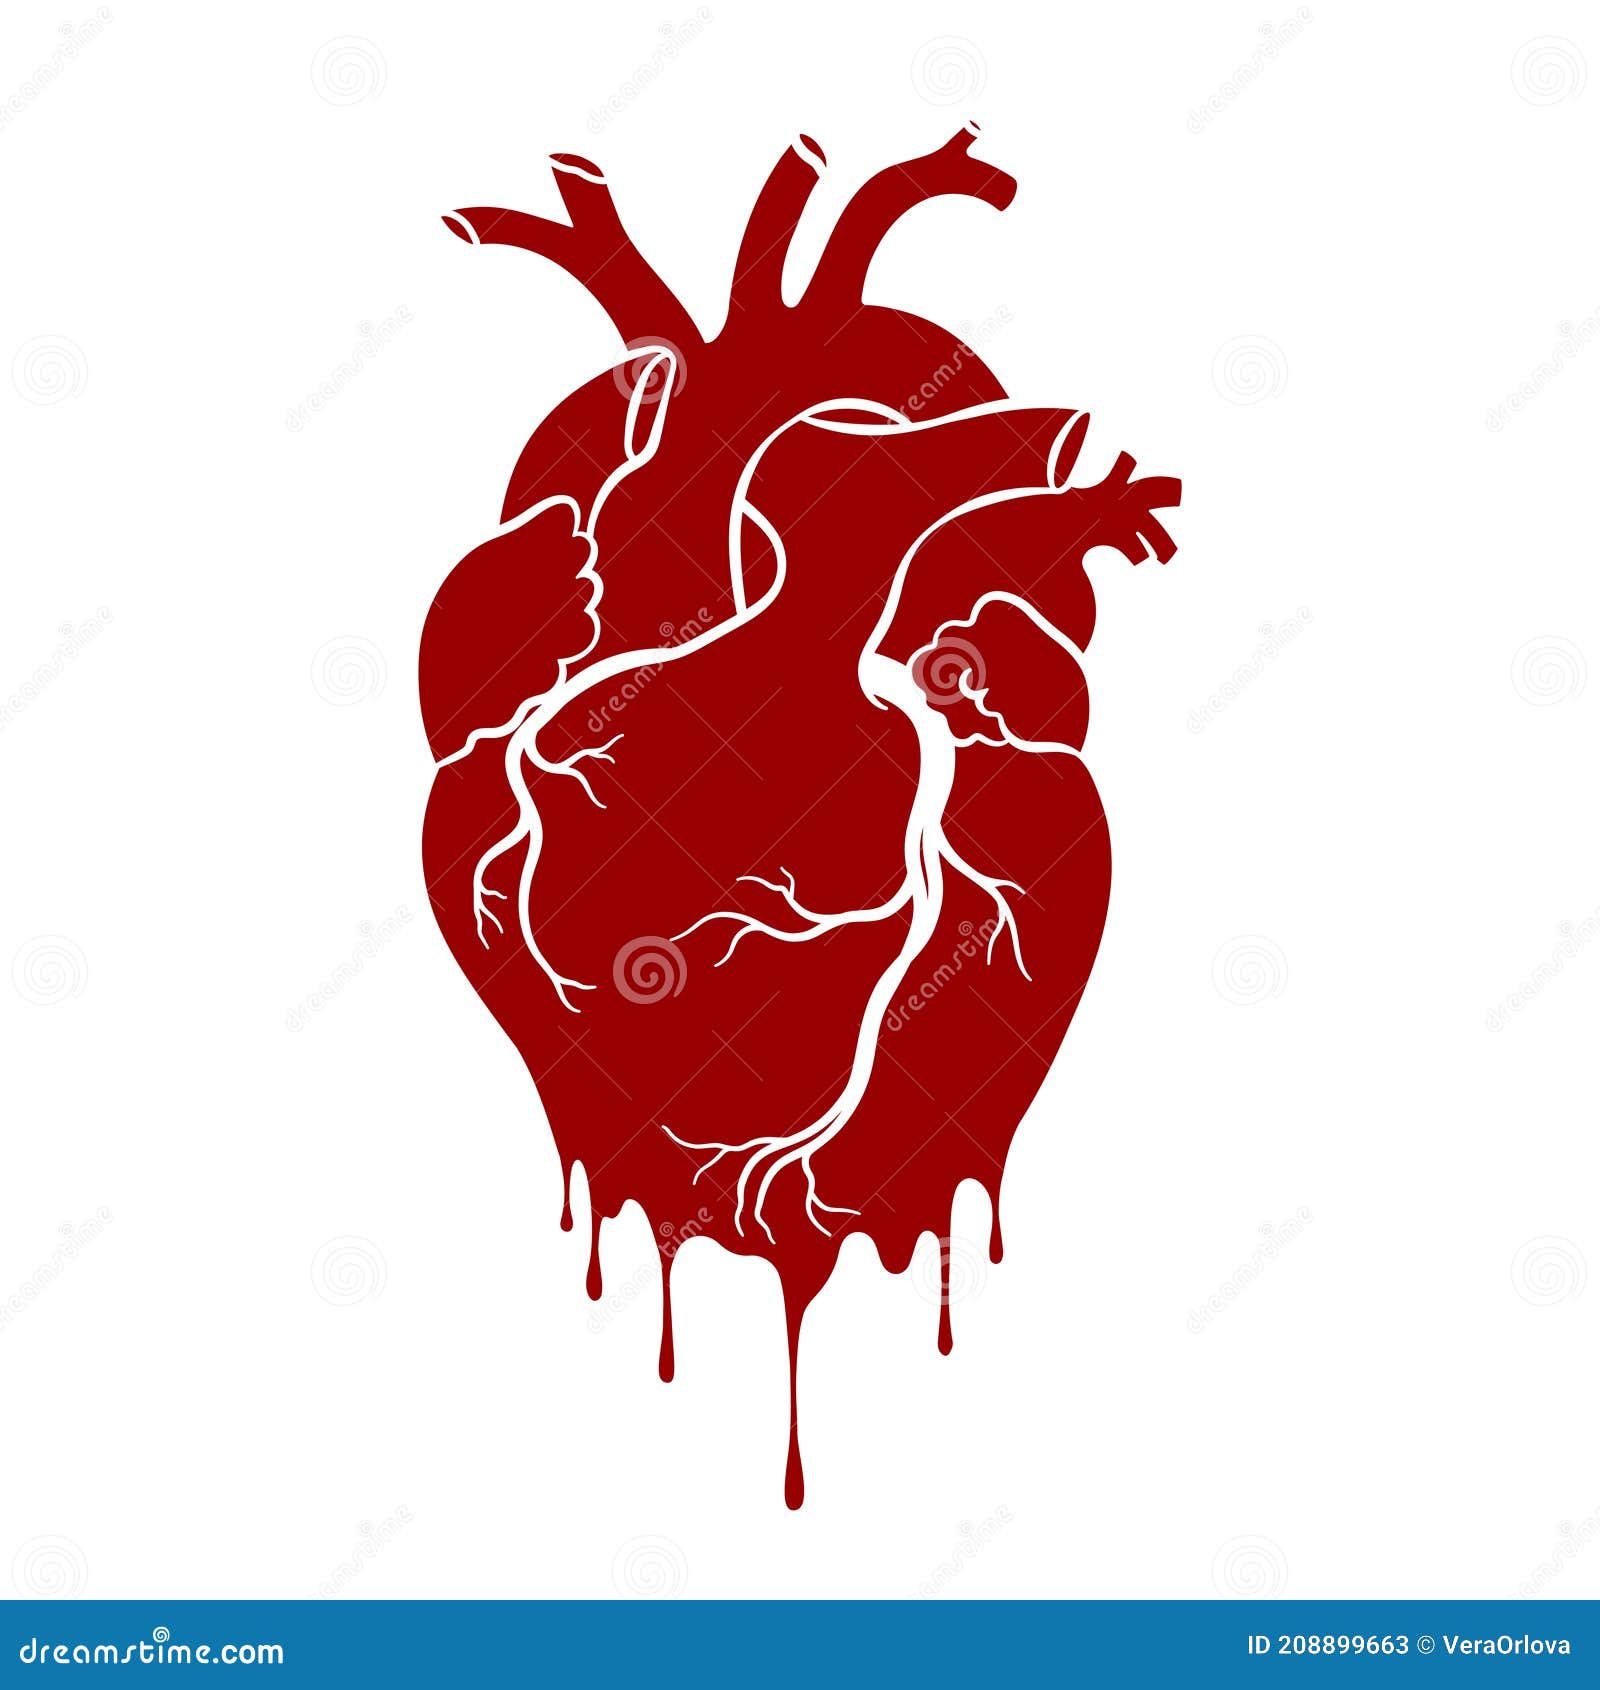 Download Human Heart Anatomical Realistic Dripping Heart Line Art Vector Illustration Stock Vector Illustration Of Line Logo 208899663